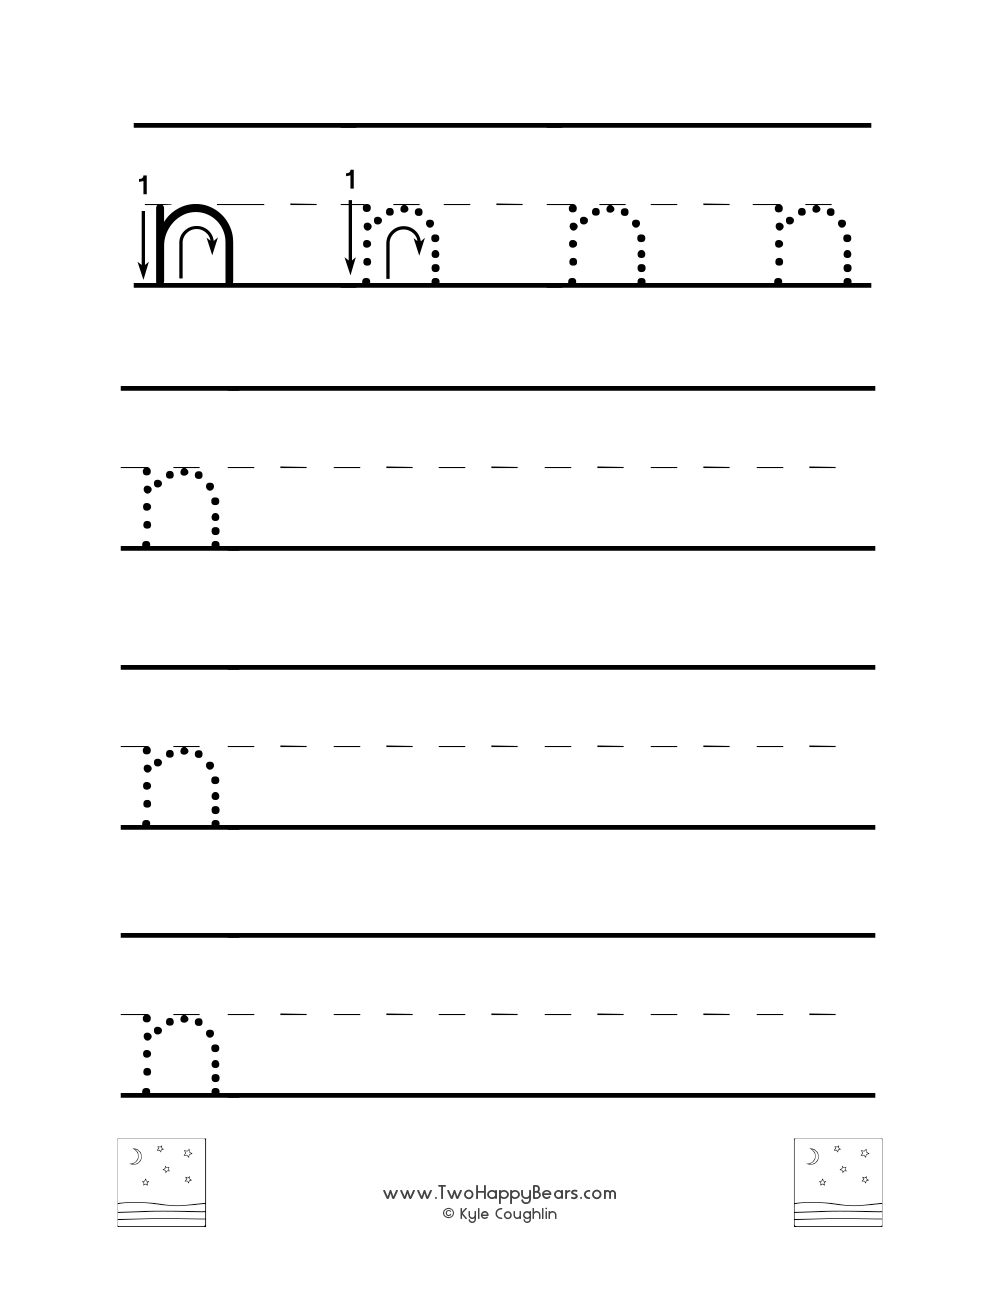 Worksheet for tracing and writing the lowercase letter N, in free printable PDF format.